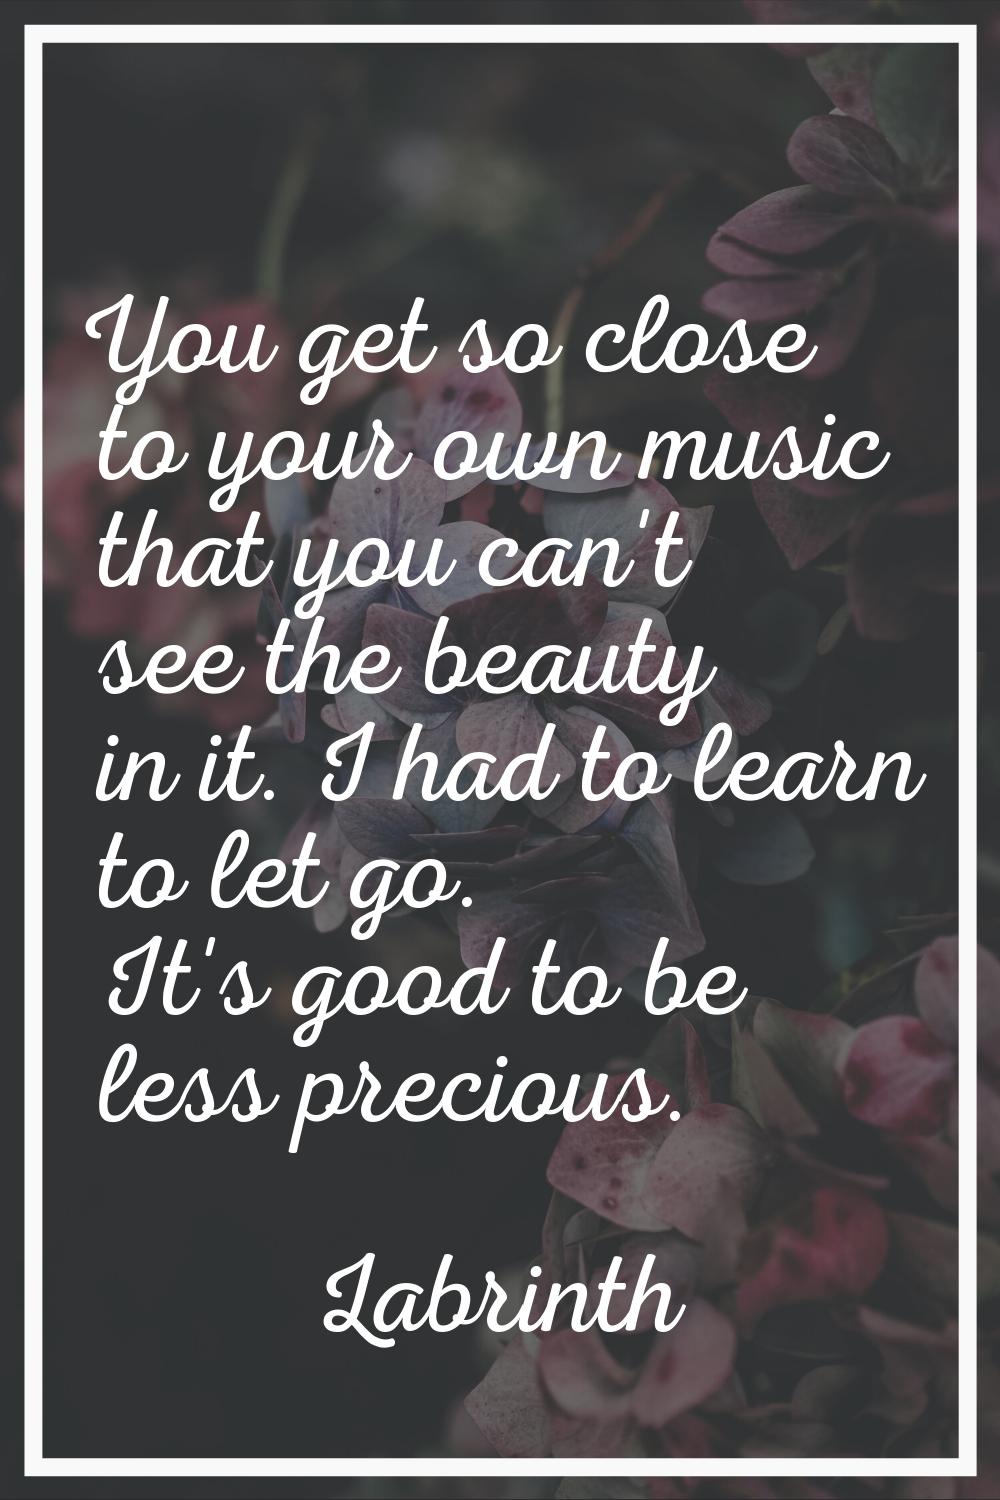 You get so close to your own music that you can't see the beauty in it. I had to learn to let go. I